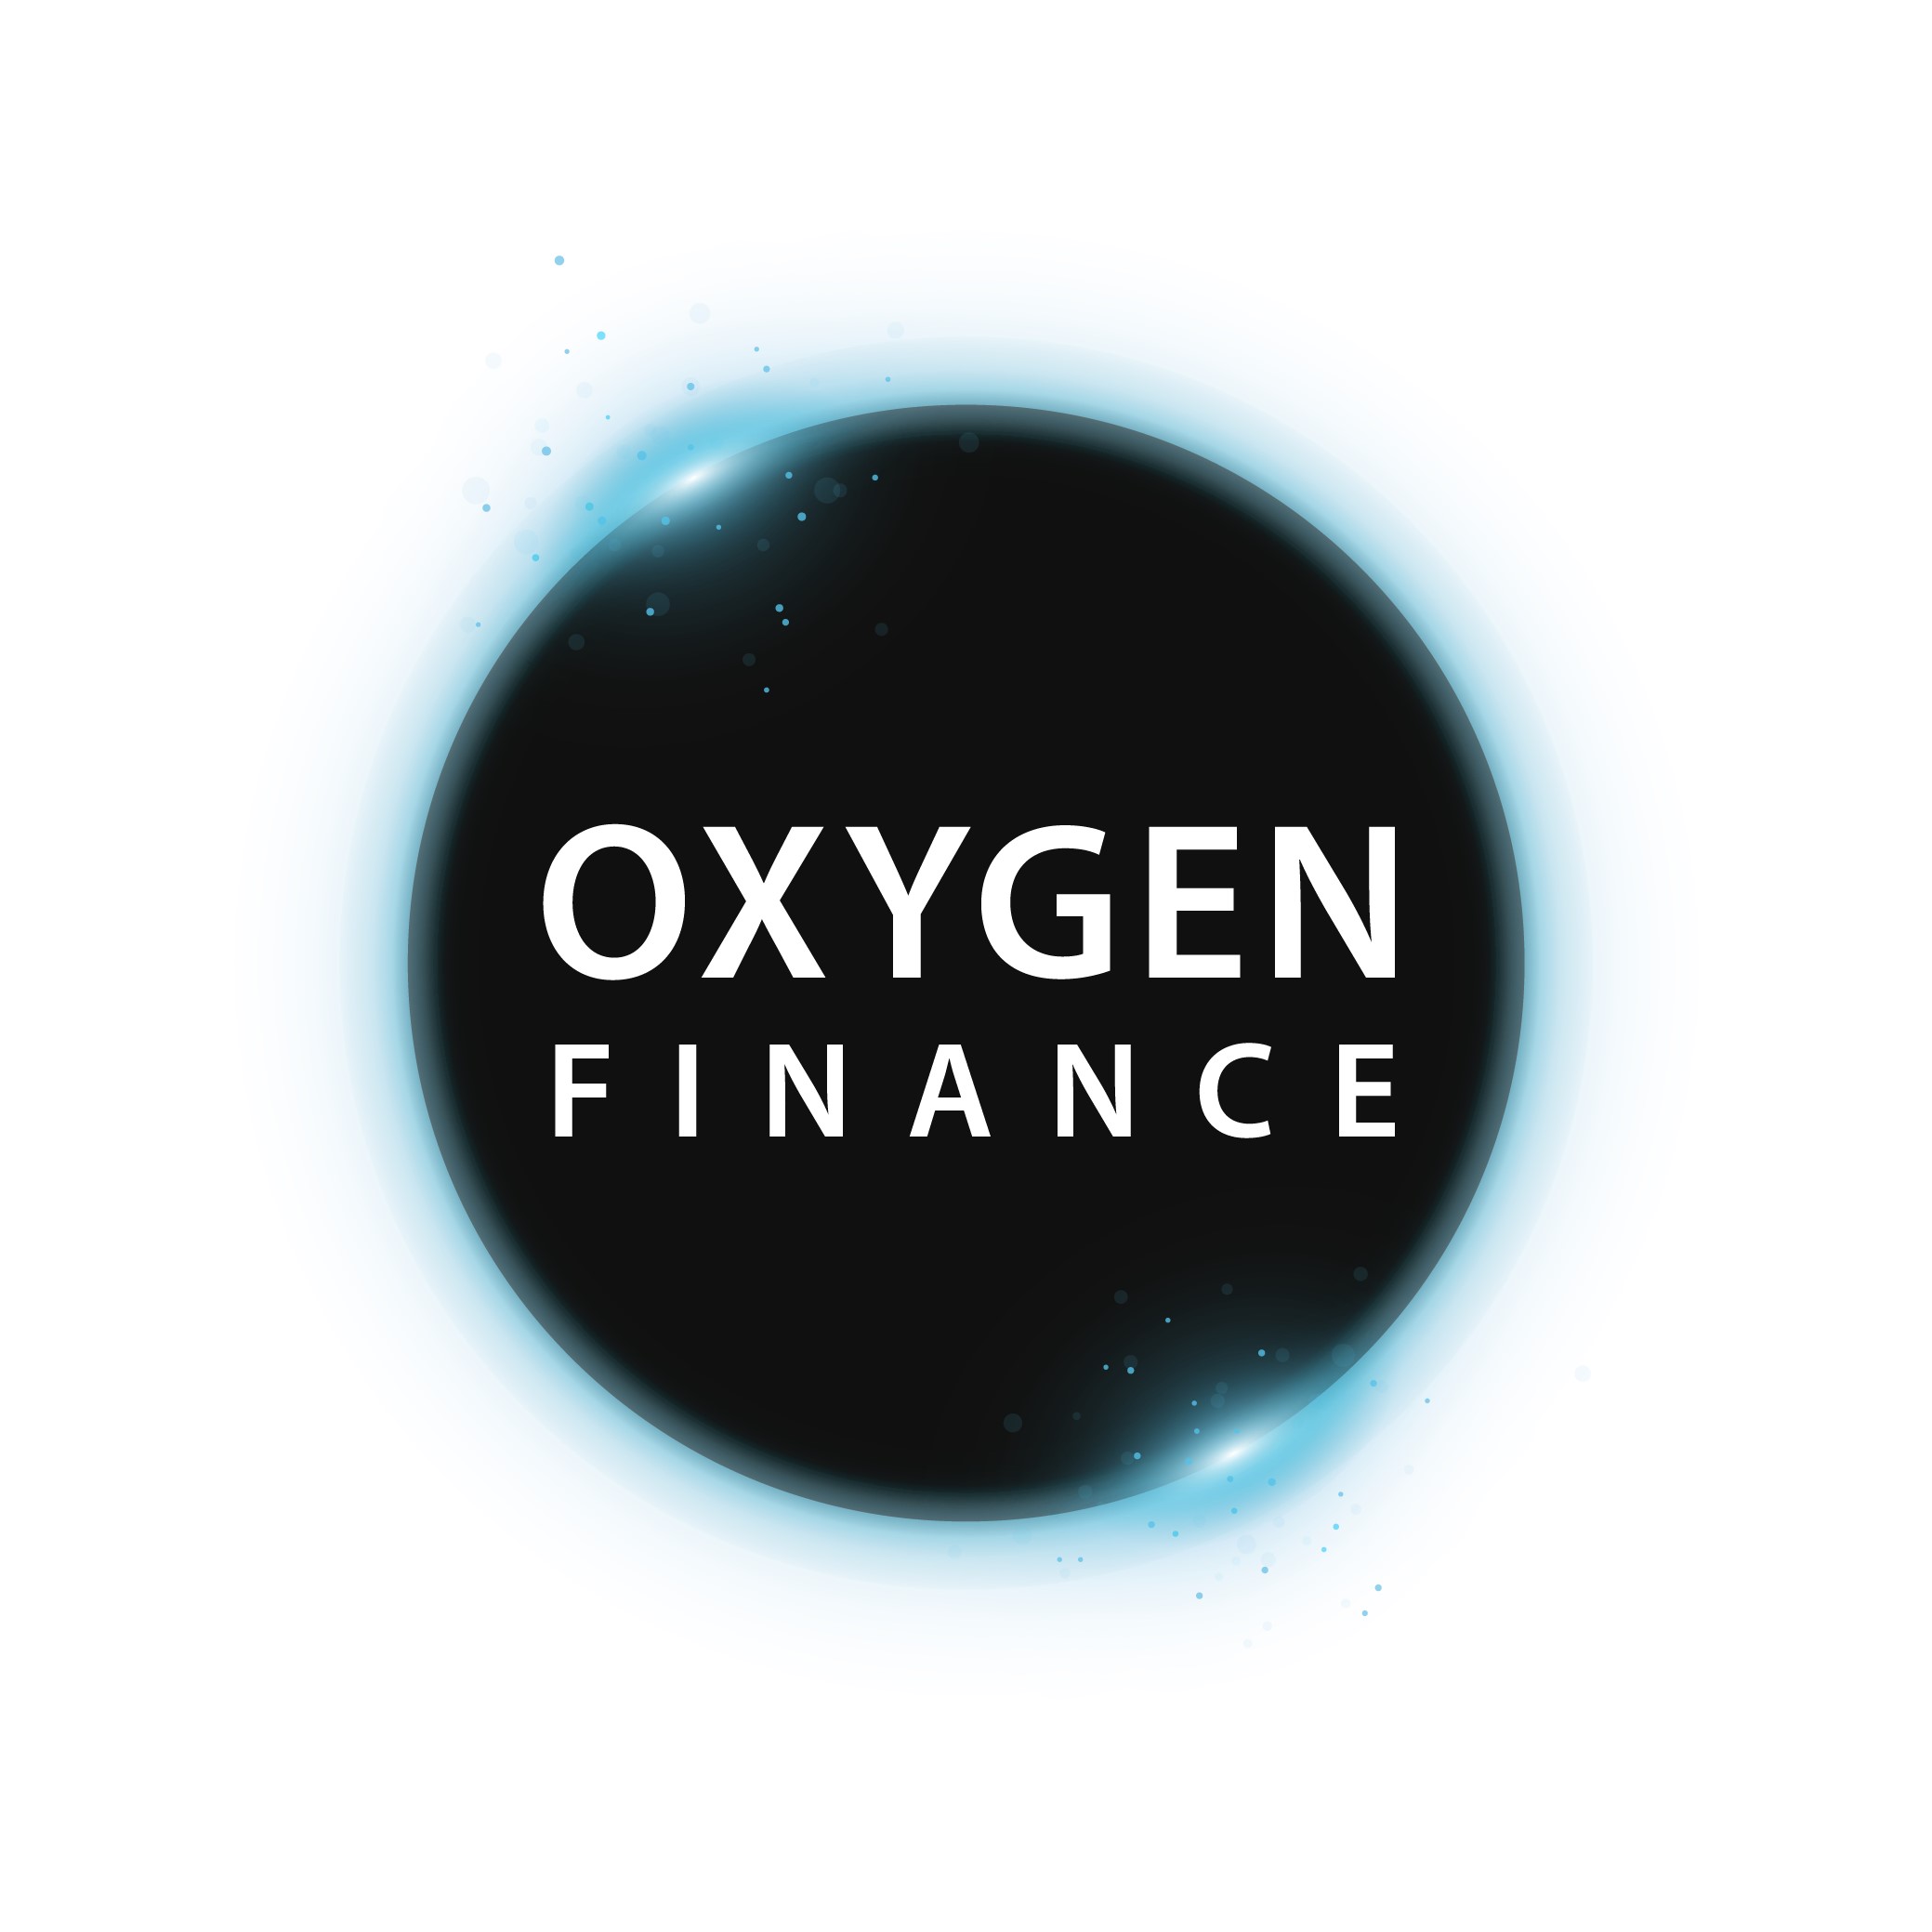 Oxygen Finance surpasses £1 billion in free early payment provision to small business